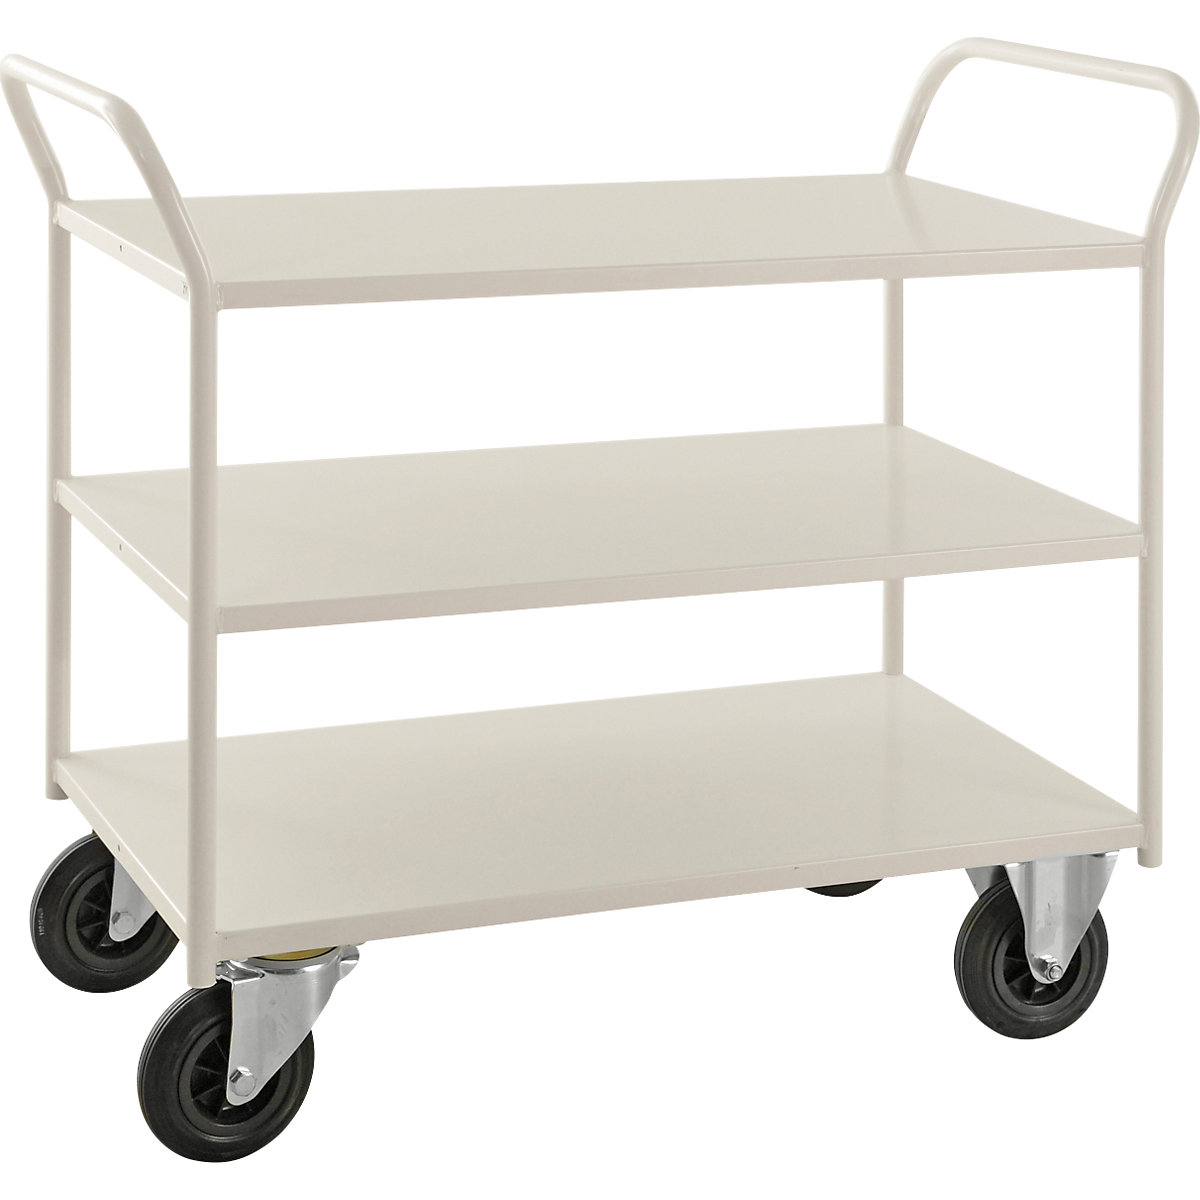 KM41 table trolley – Kongamek, 3 shelves with raised edges, LxWxH 1070 x 550 x 1000 mm, white, 2 swivel castors with stops, 2 fixed castors, 5+ items-2